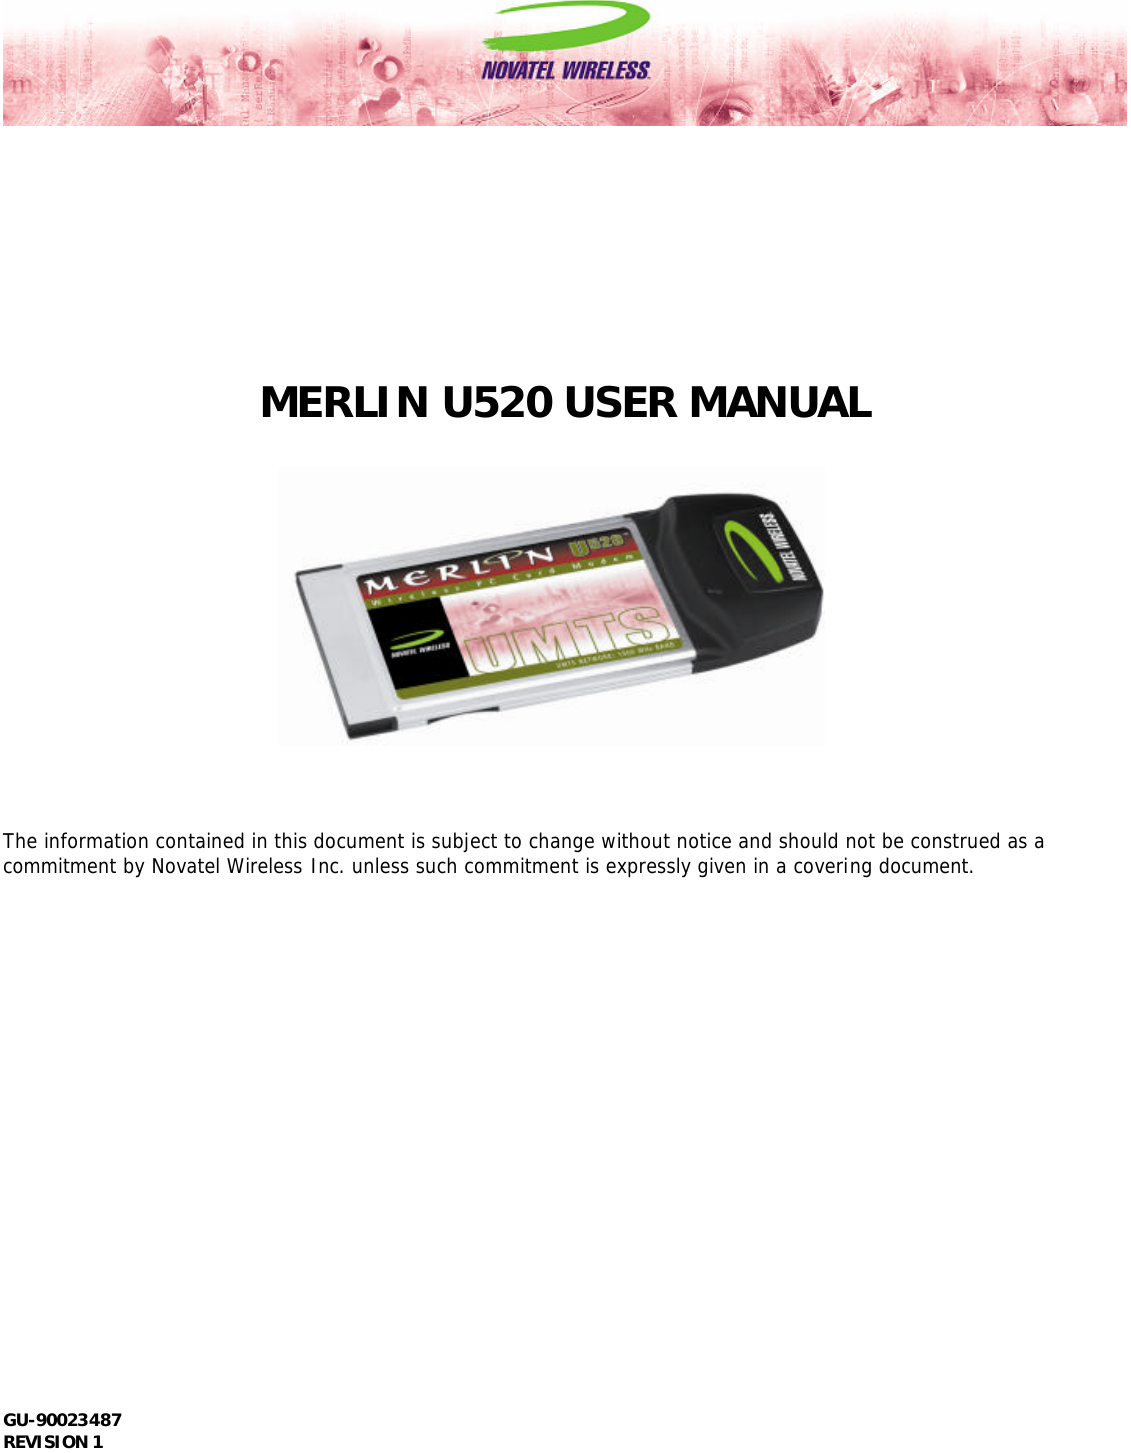  GU-90023487             REVISION 1                  MERLIN U520 USER MANUAL                 The information contained in this document is subject to change without notice and should not be construed as a commitment by Novatel Wireless Inc. unless such commitment is expressly given in a covering document.                      